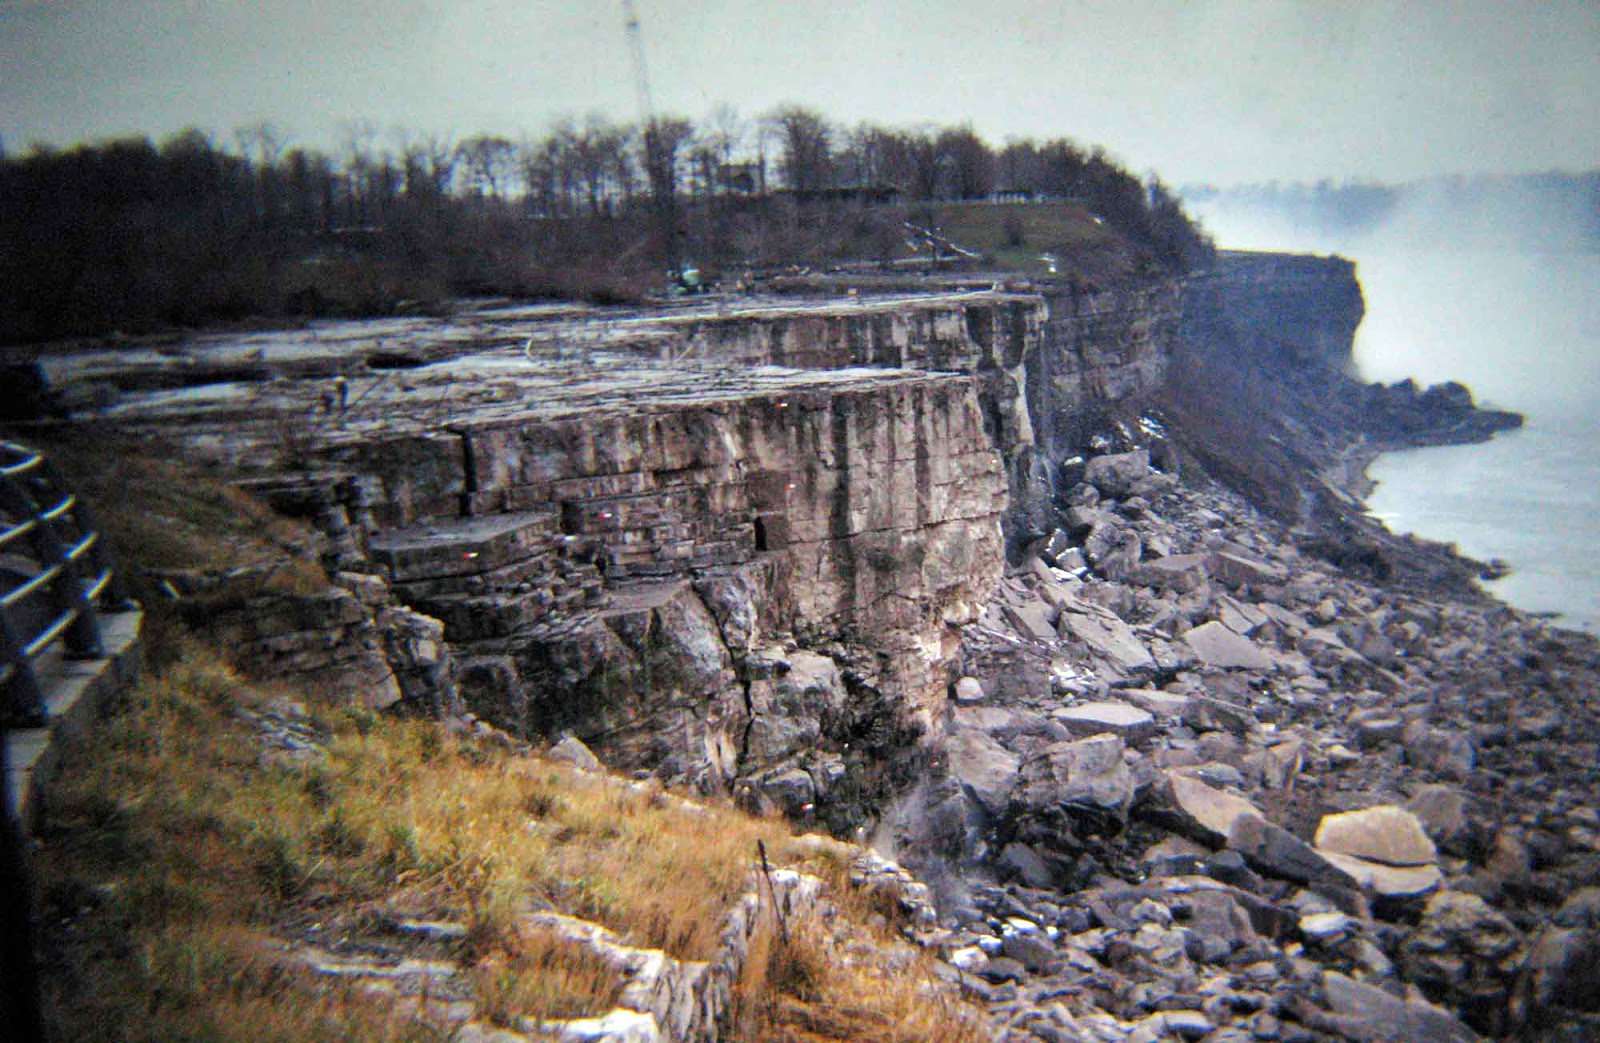 While the Horseshoe Falls absorbed the extra flow, the U.S. Army Corps of Engineers studied the riverbed and mechanically bolted and strengthened any faults they found.